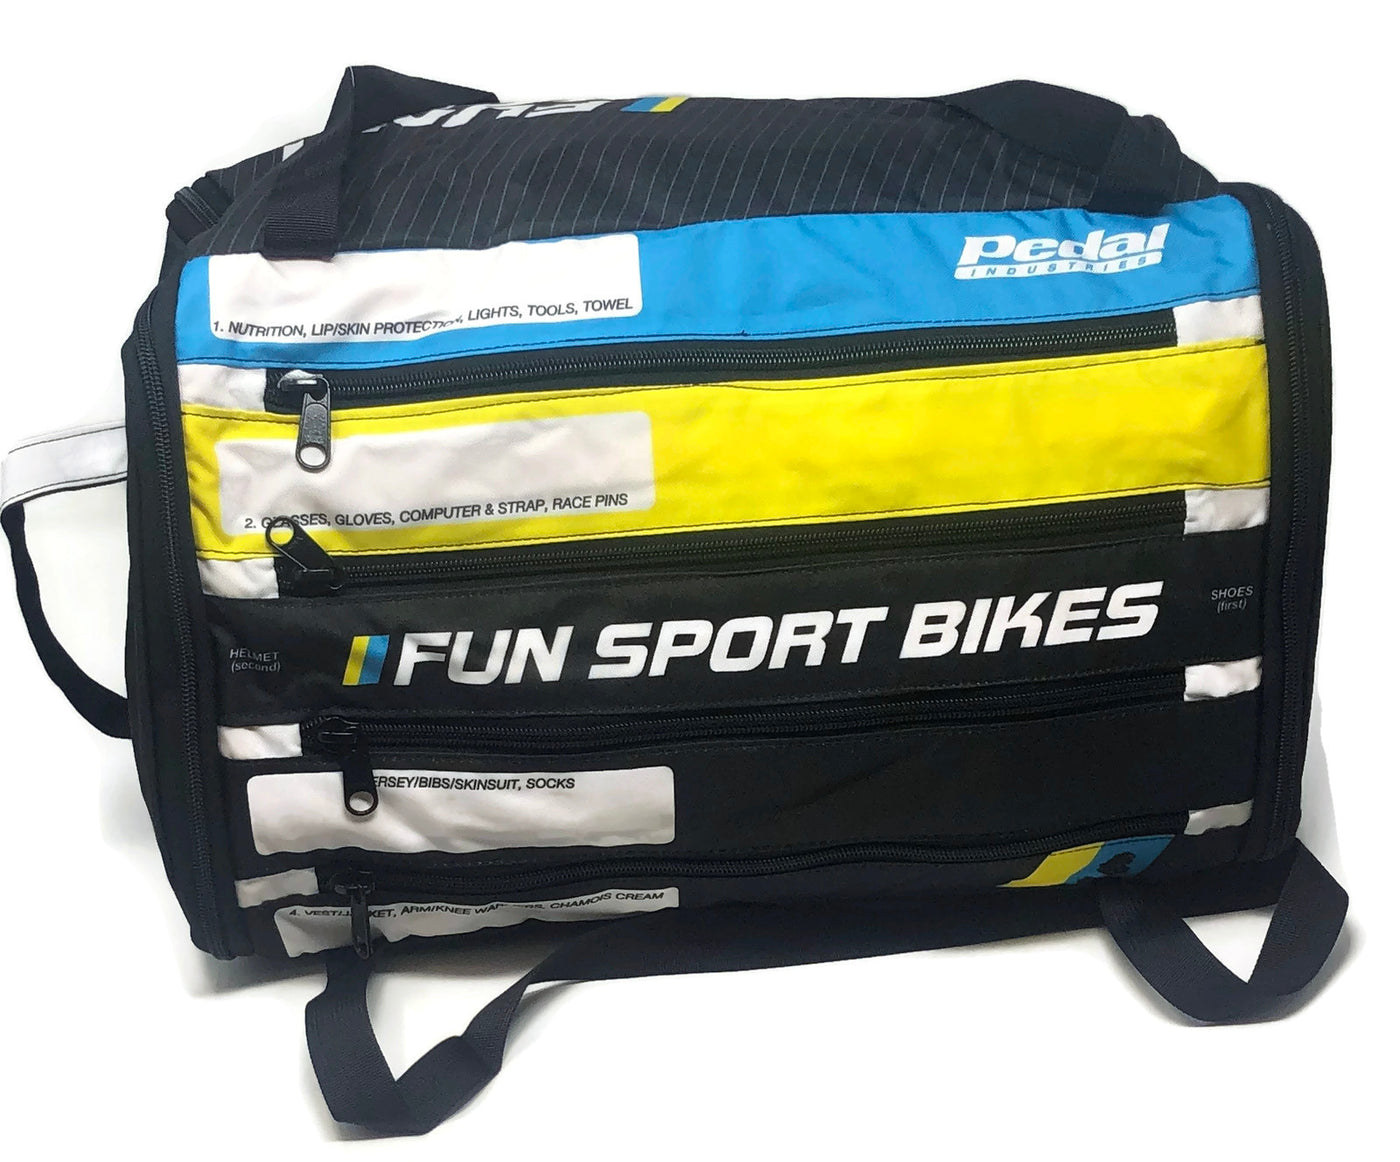 FunSport Bikes RACEDAY BAG 2018 - ships in about 3 weeks